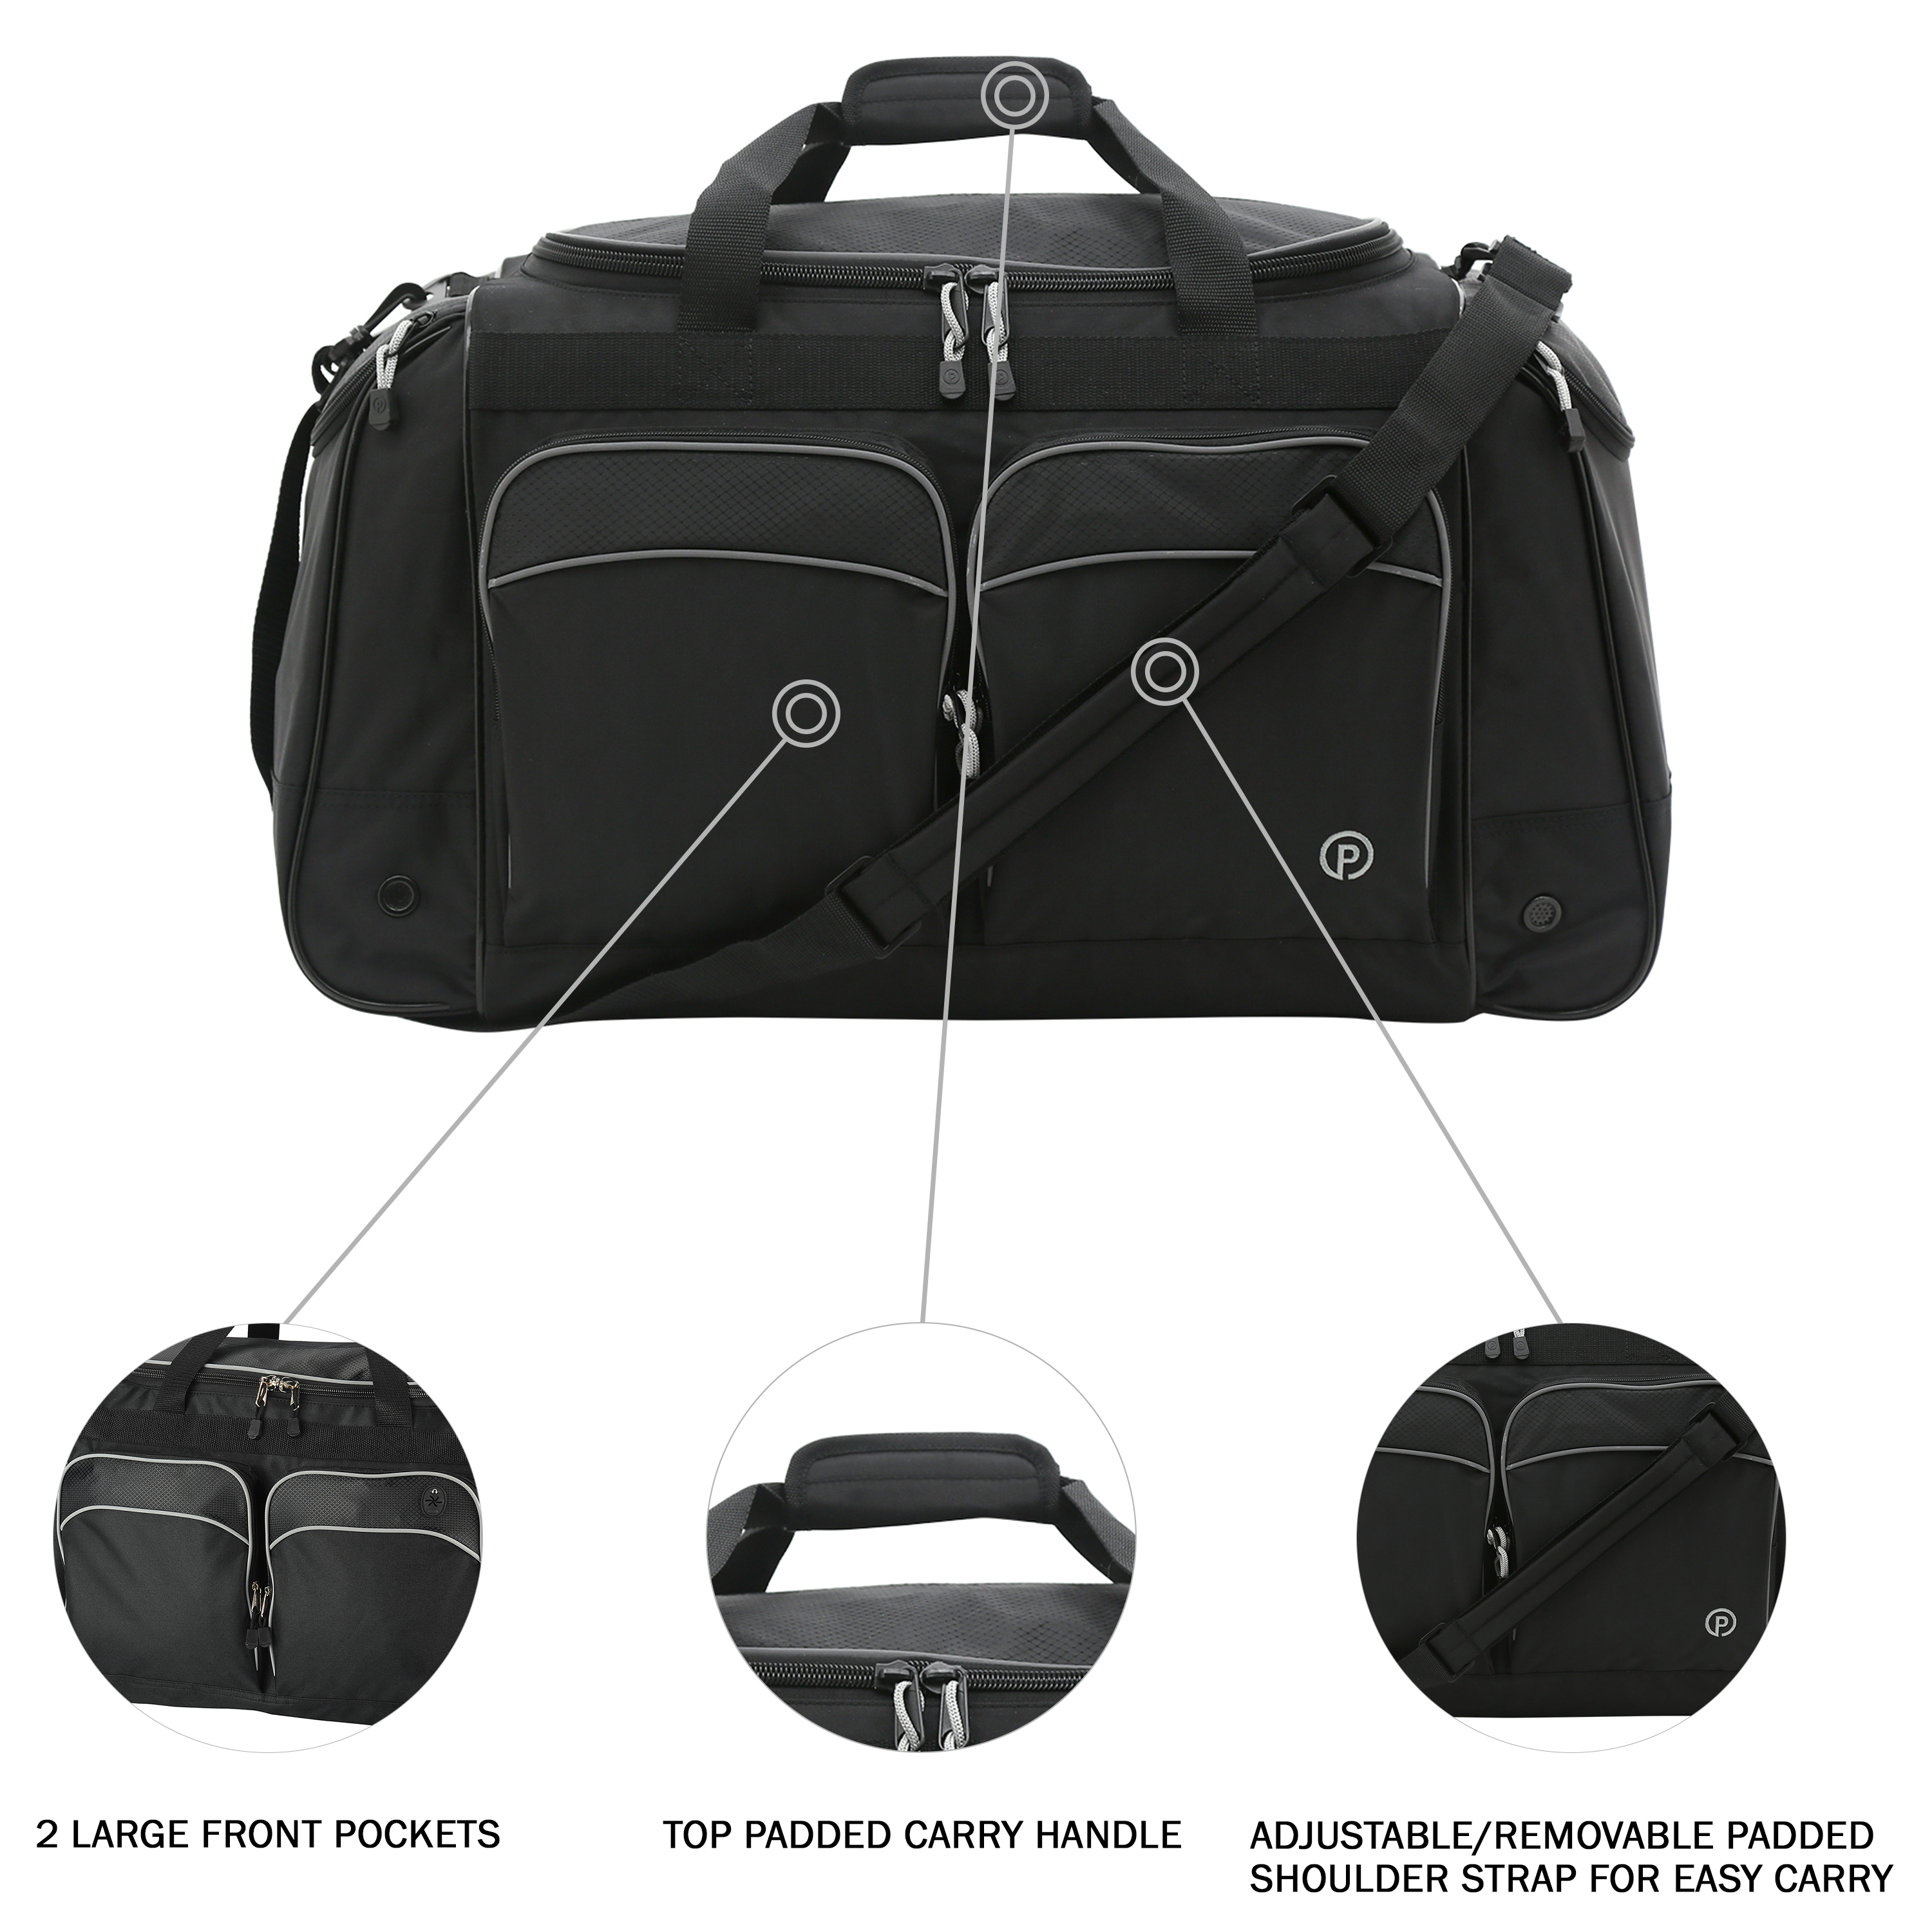 Protégé 28" Polyester Sport and Travel Duffel Bag, Black - image 3 of 6